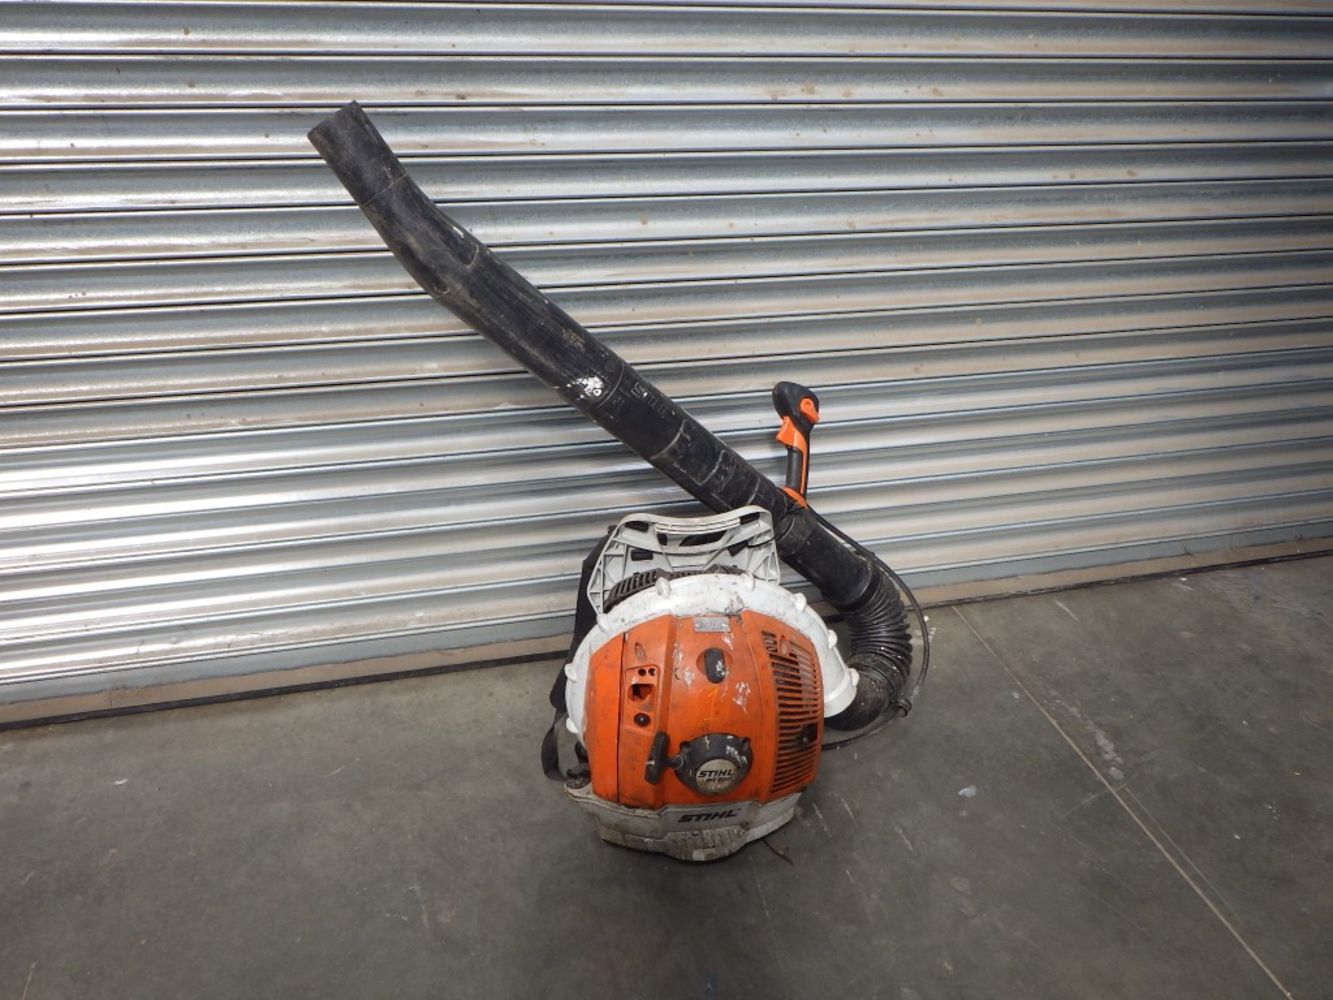 Timed Auction of Grounds Care Equipment, Small Plant & Other Sundry Items